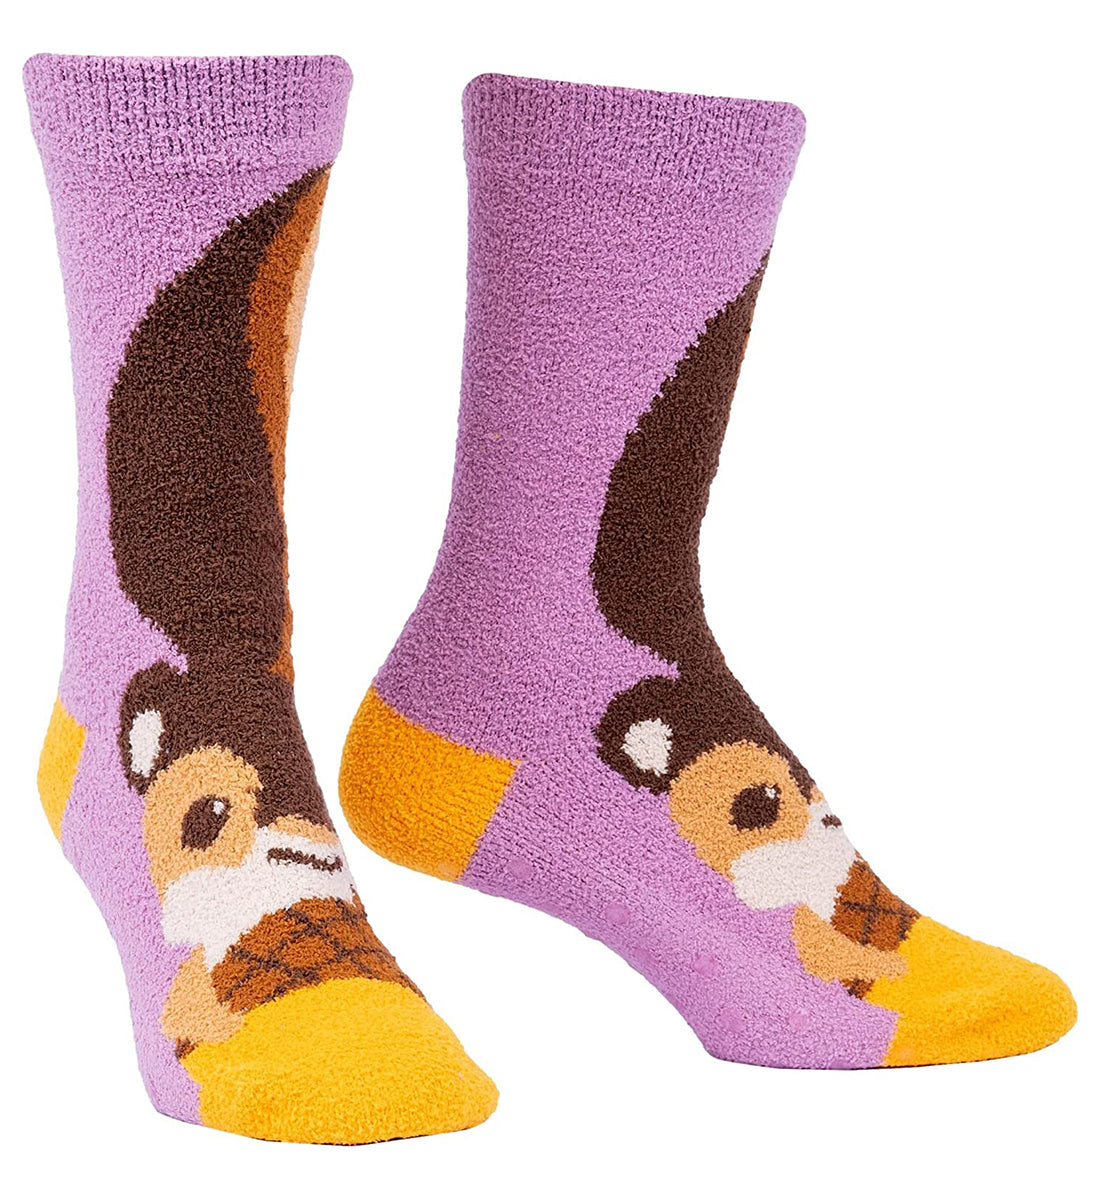 SOCK it to me Slipper Socks (CZ0009),I'm Nuts About You - I'm Nuts About You,One Size